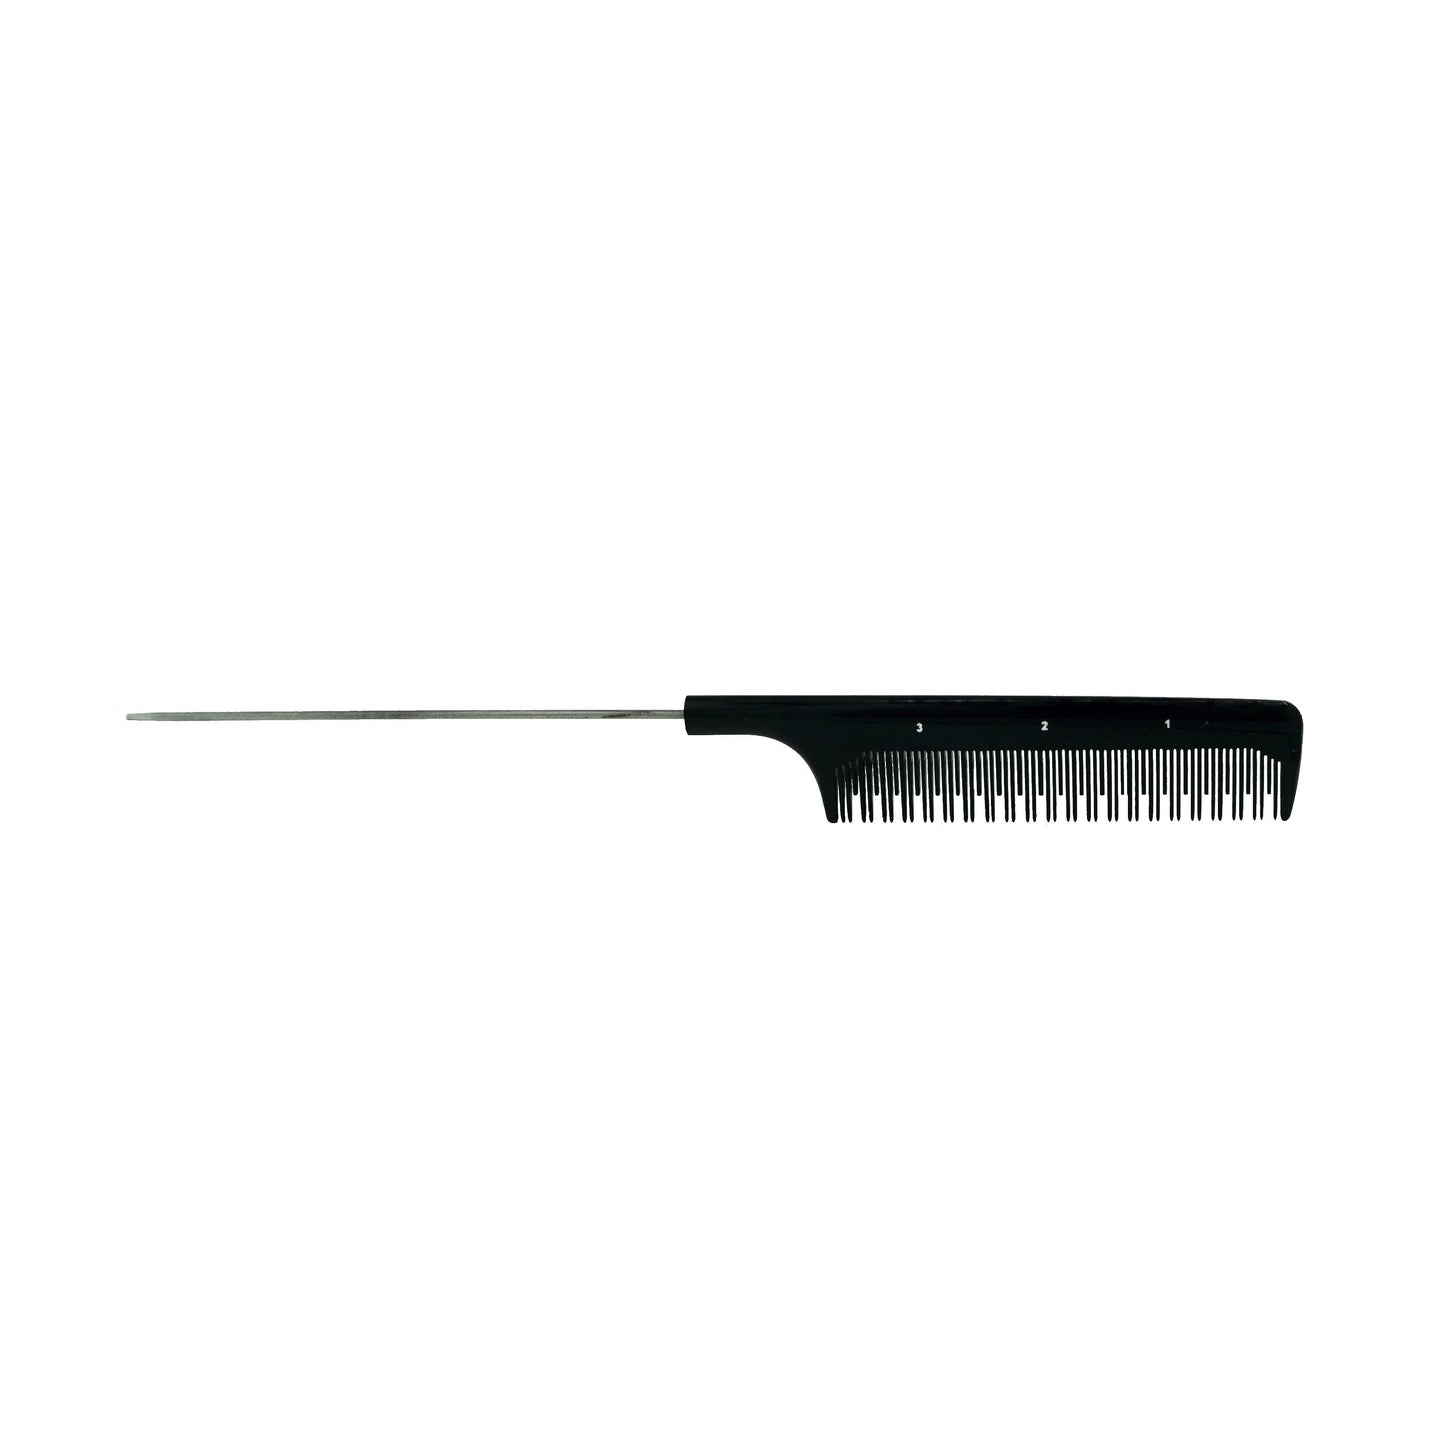 Pegasus 125, 9.75in Hard Rubber Pintail Tease Comb, Smooth Edges, Anti Static, Heat and Chemically Resistant, Stainless Steel Pin, Great for Parting, Coloring Hair | Peines de goma dura - Black